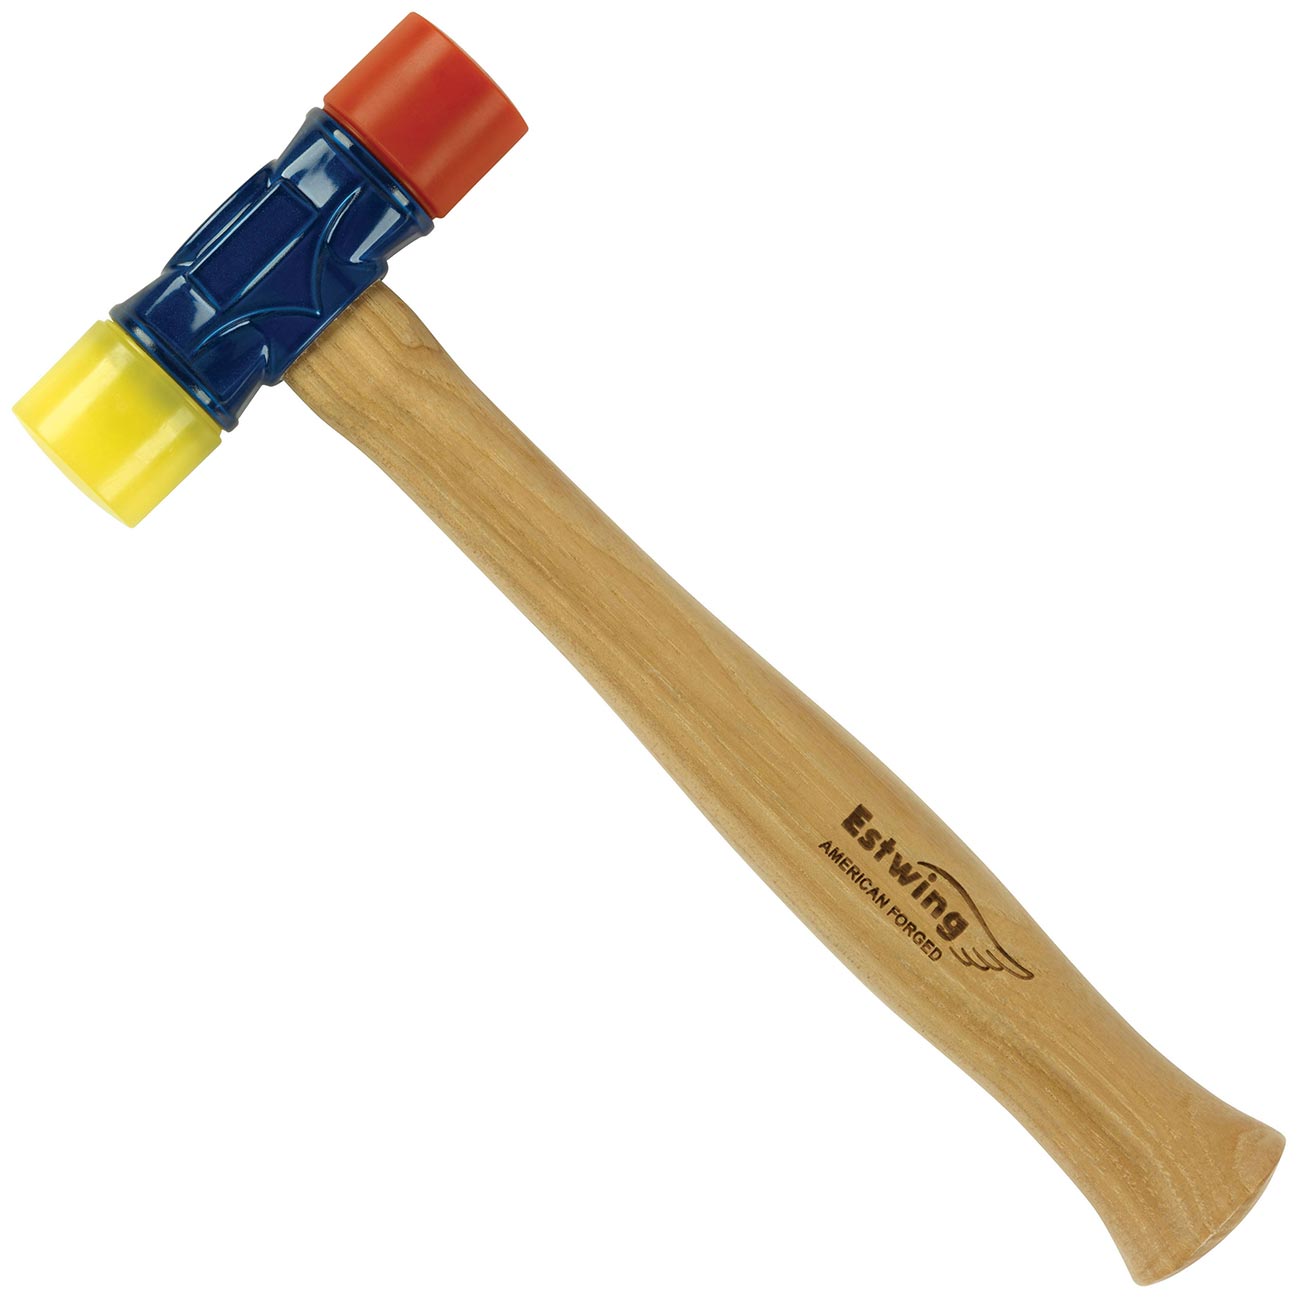 Estwing 12.5" Rubber Mallet Hammer (Red & Yellow)